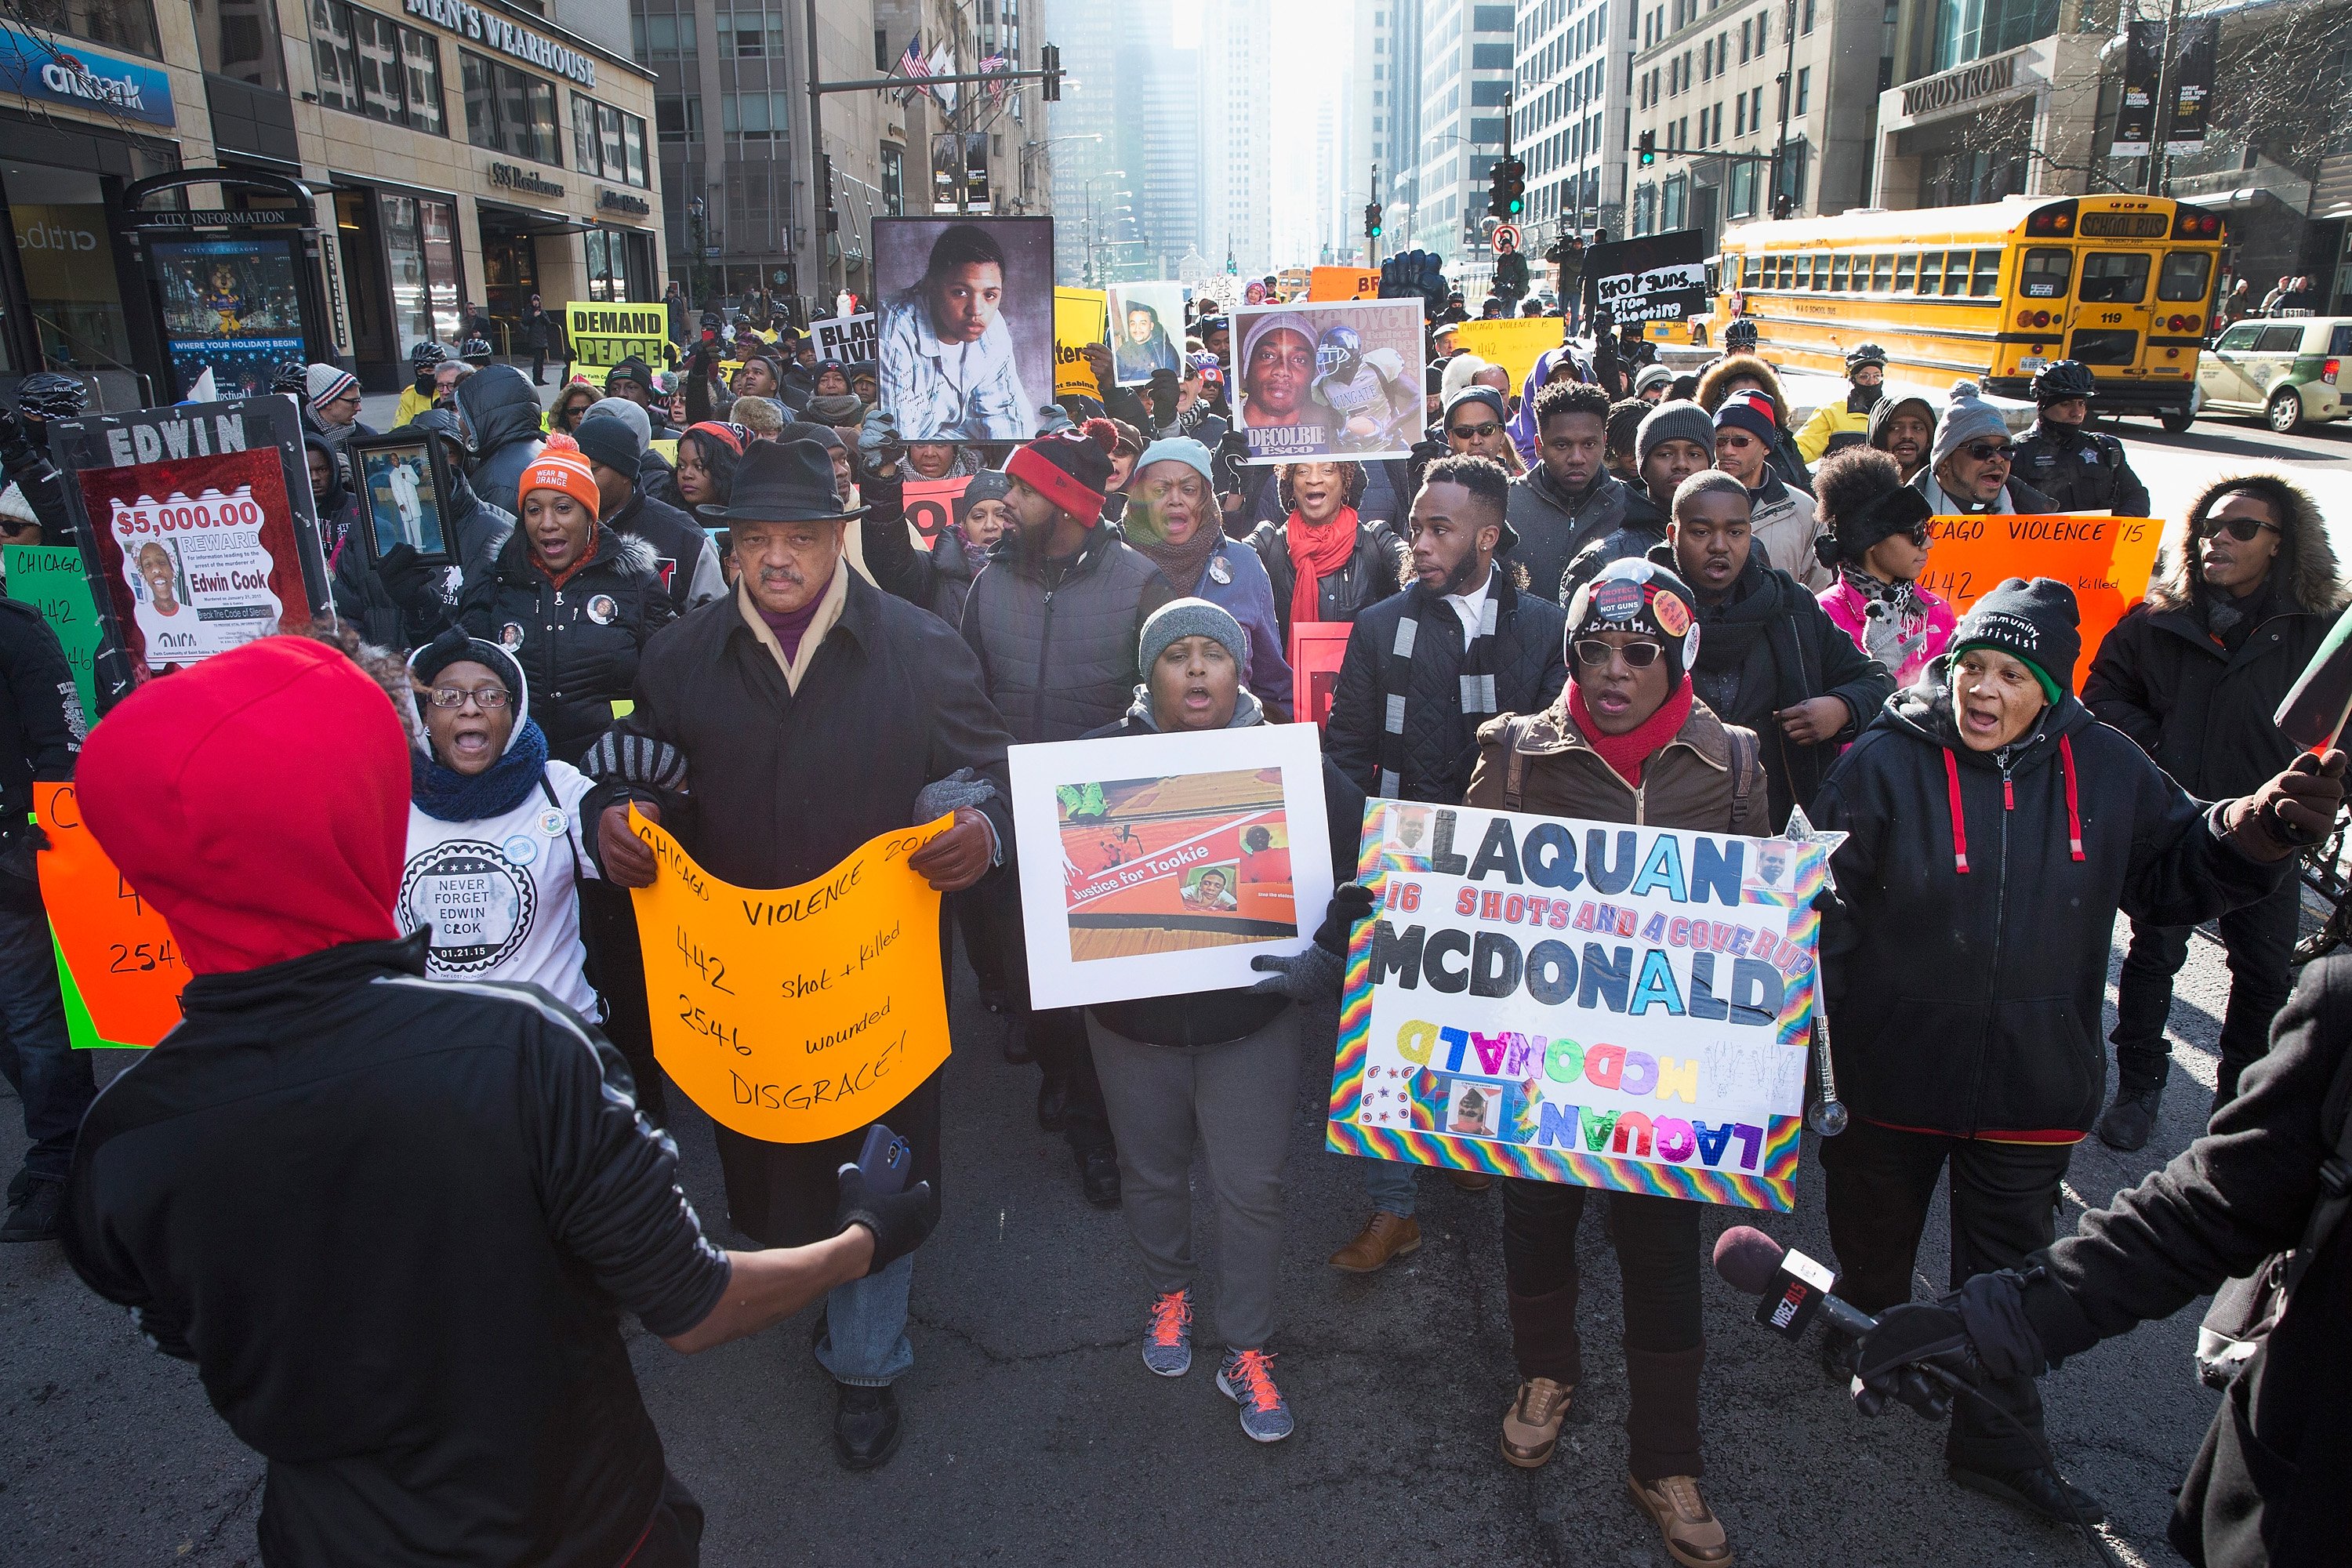 Rev. Jesse Jackson helps to lead demonstrators calling for an end to gun violence as they march through downtown Chicago on Dec. 31, 2015. The shooting deaths by police of a 19-year-old college student Quintonio LeGrier and his 55-year-old neighbor Bettie Jones and a recently released video showing the shooting of 17-year-old Laquan McDonald by Chicago Police officer Jason Van Dyke have sparked dozens of protests in the city. (Scott Olson—Getty Images)